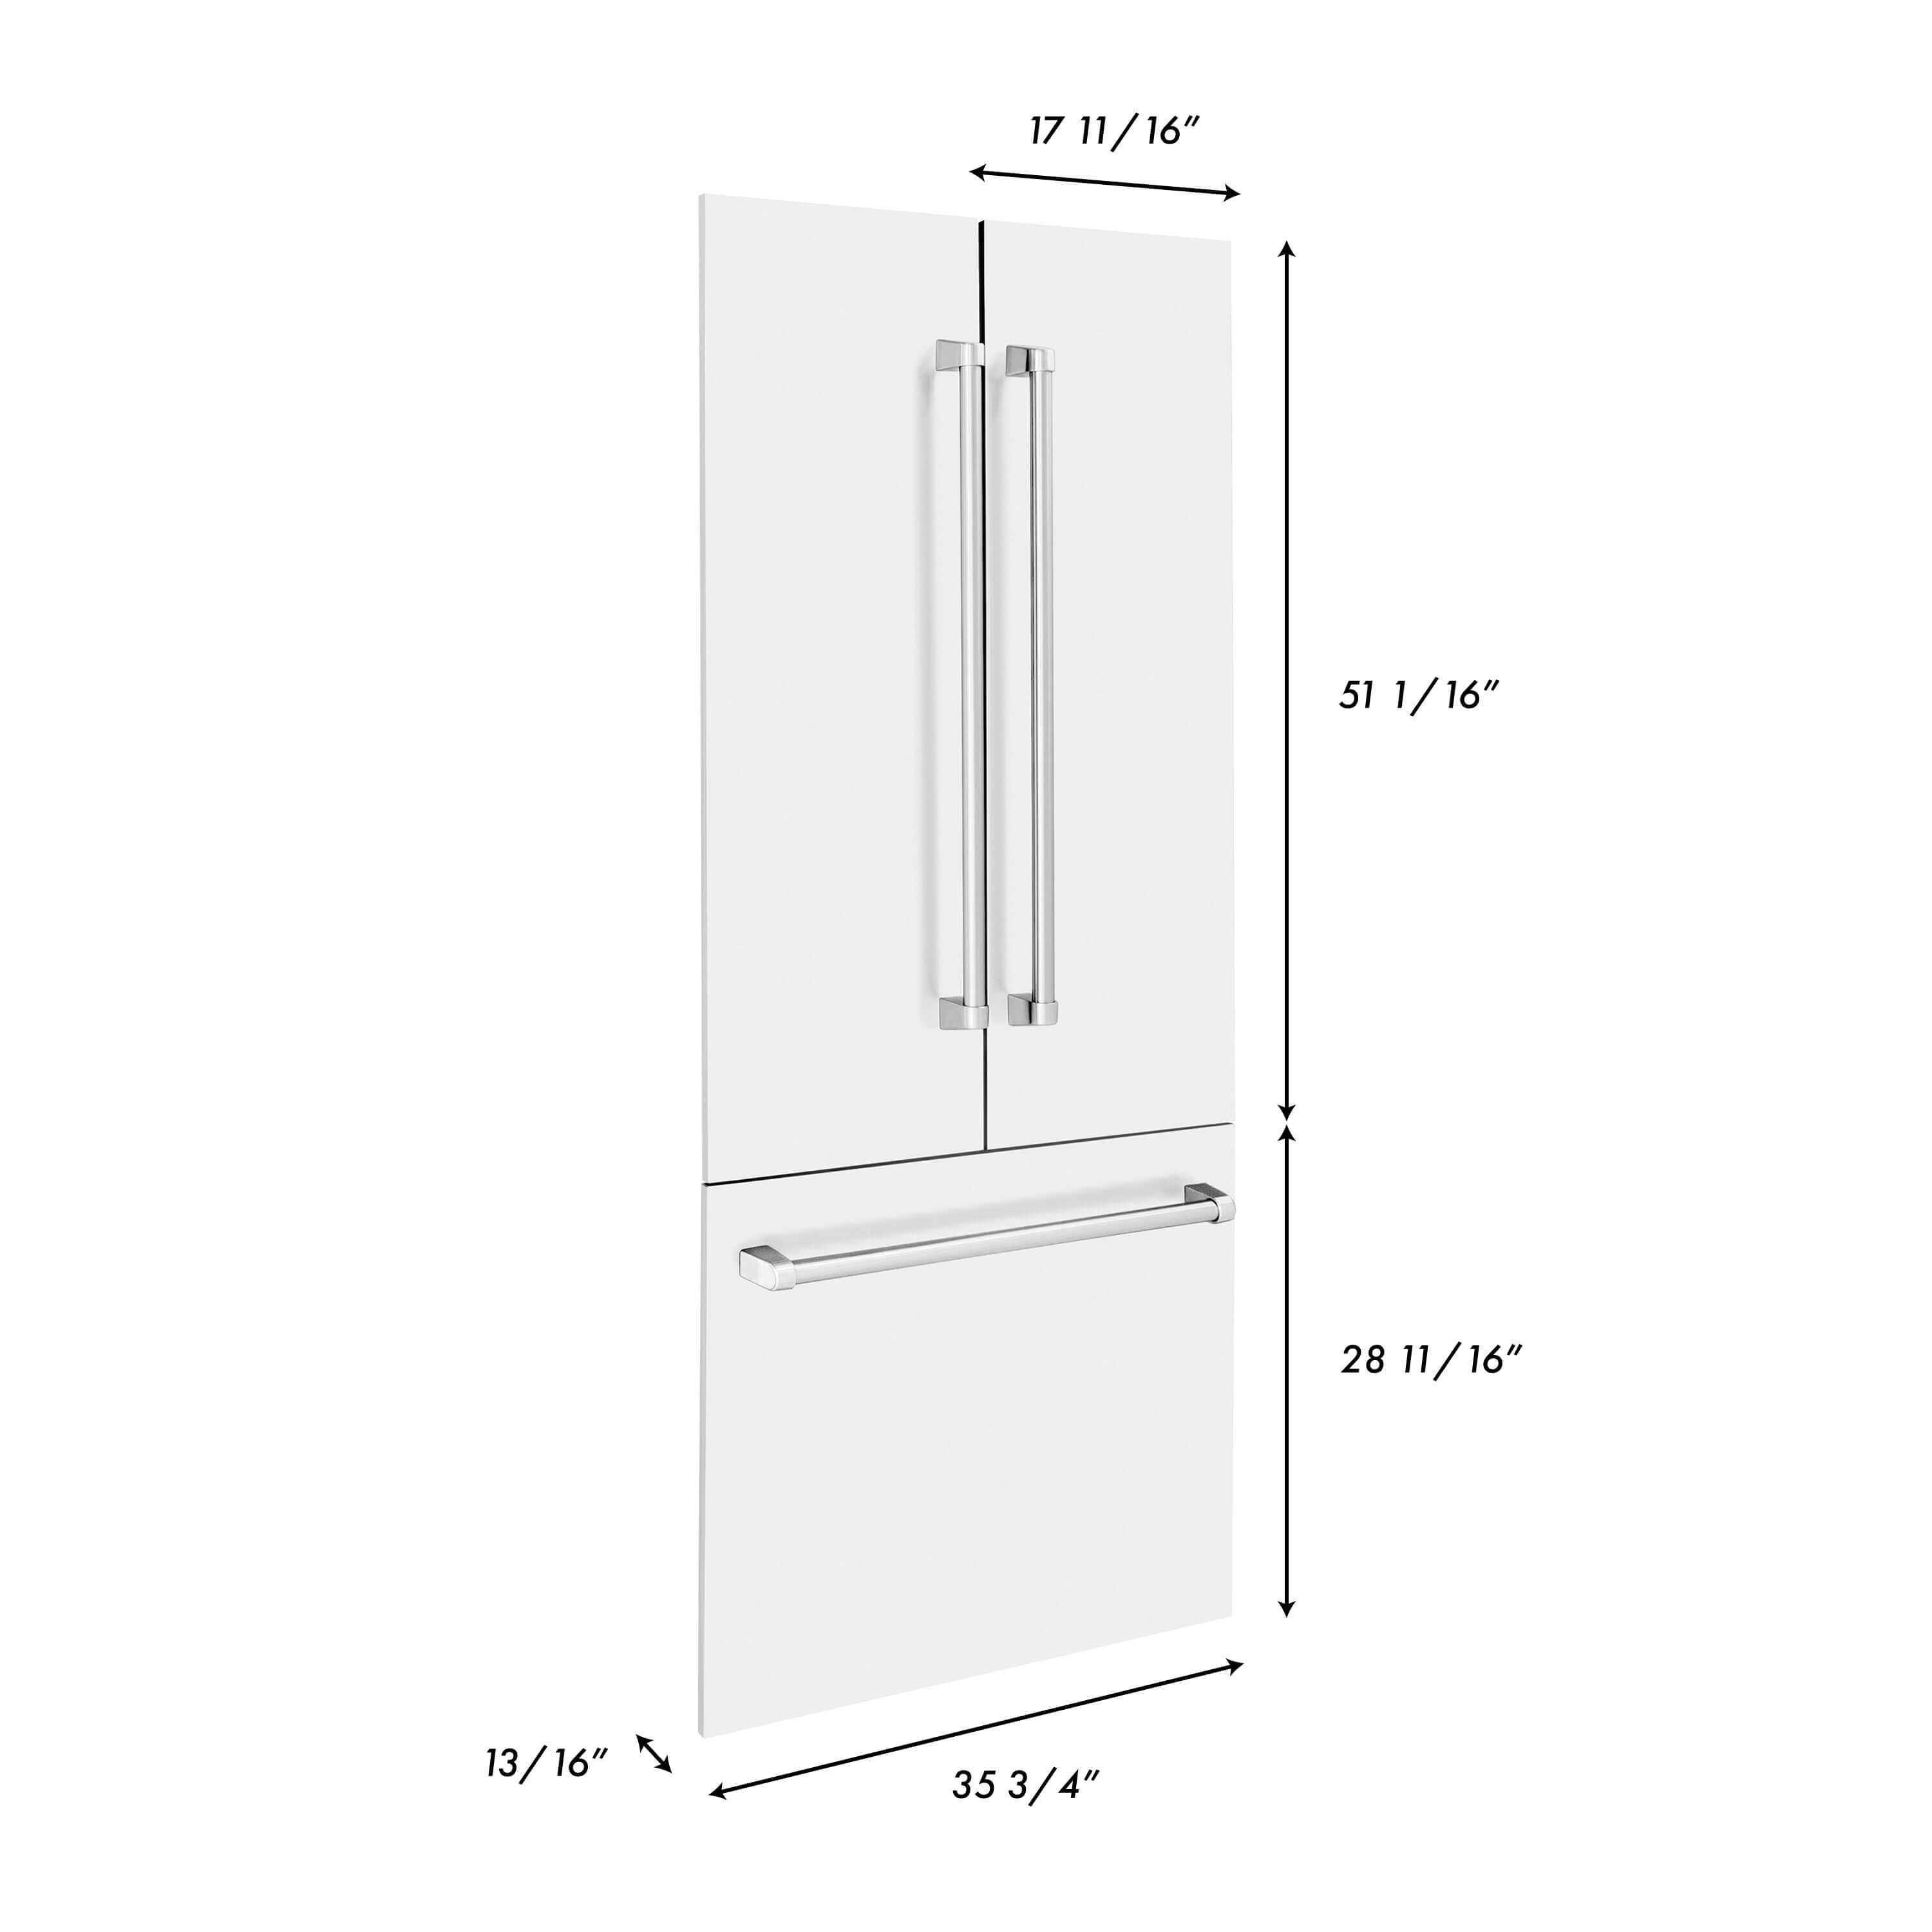 Panels & Handles Only- ZLINE 36 in. Refrigerator Panels in White Matte for a 36 in. Built-in Refrigerator (RPBIV-WM-36) dimensional diagram with measurements.